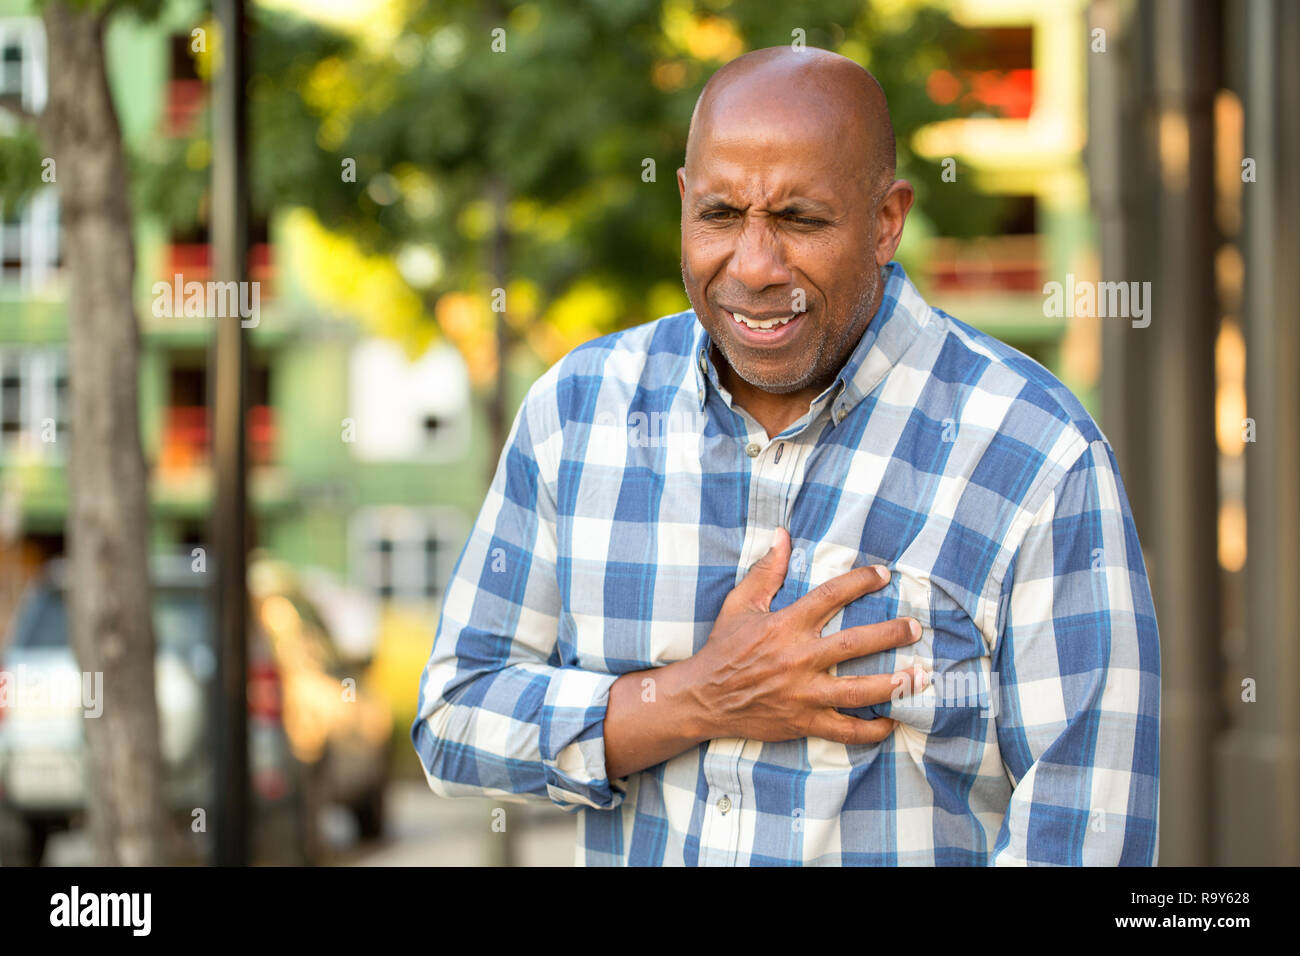 African American man having pains holding his chest. Stock Photo